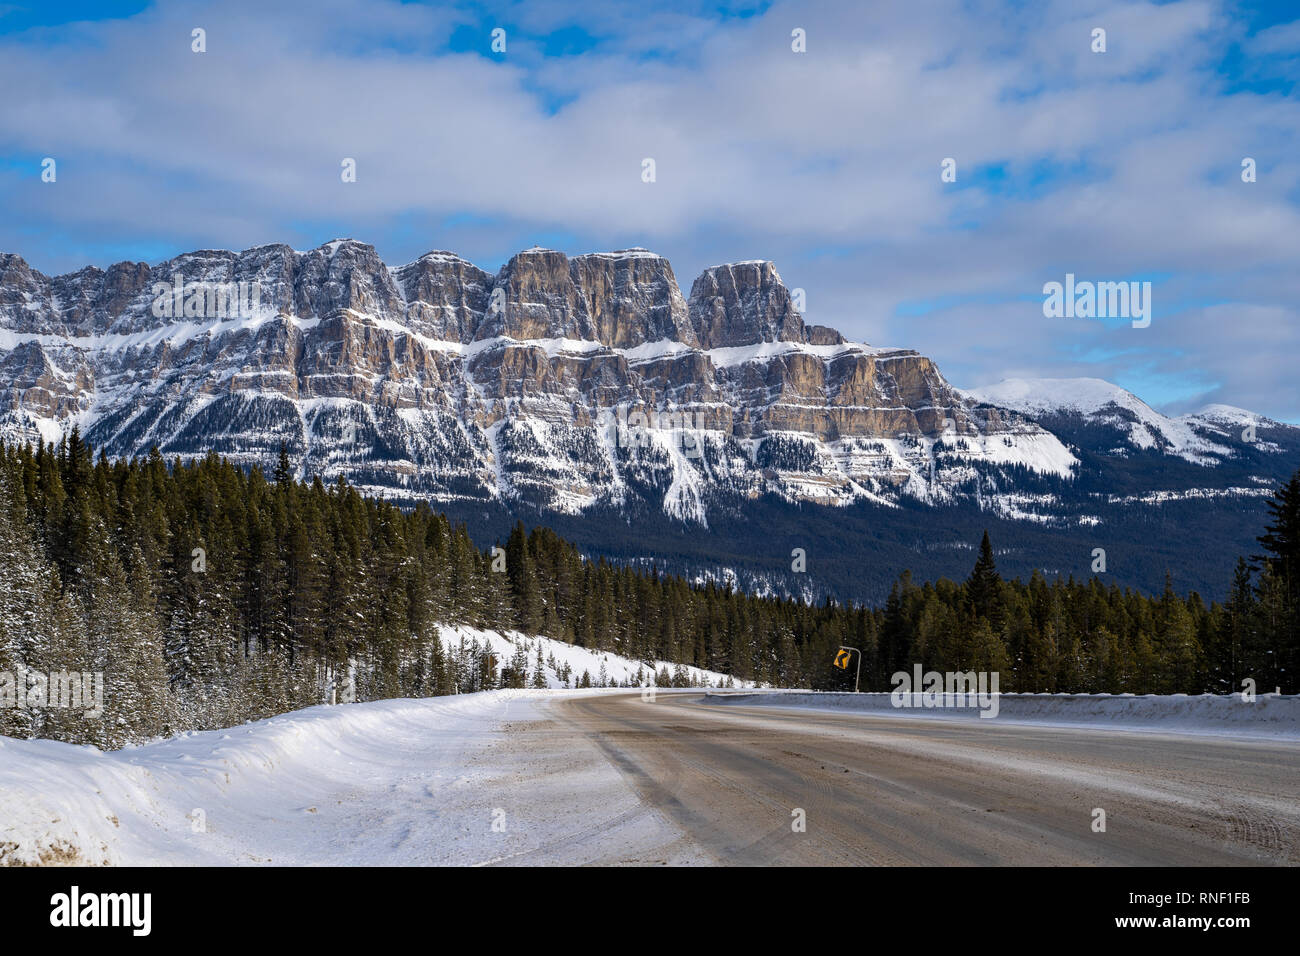 Kootenay National Park in the winter, viewed from Highway 93 Stock Photo